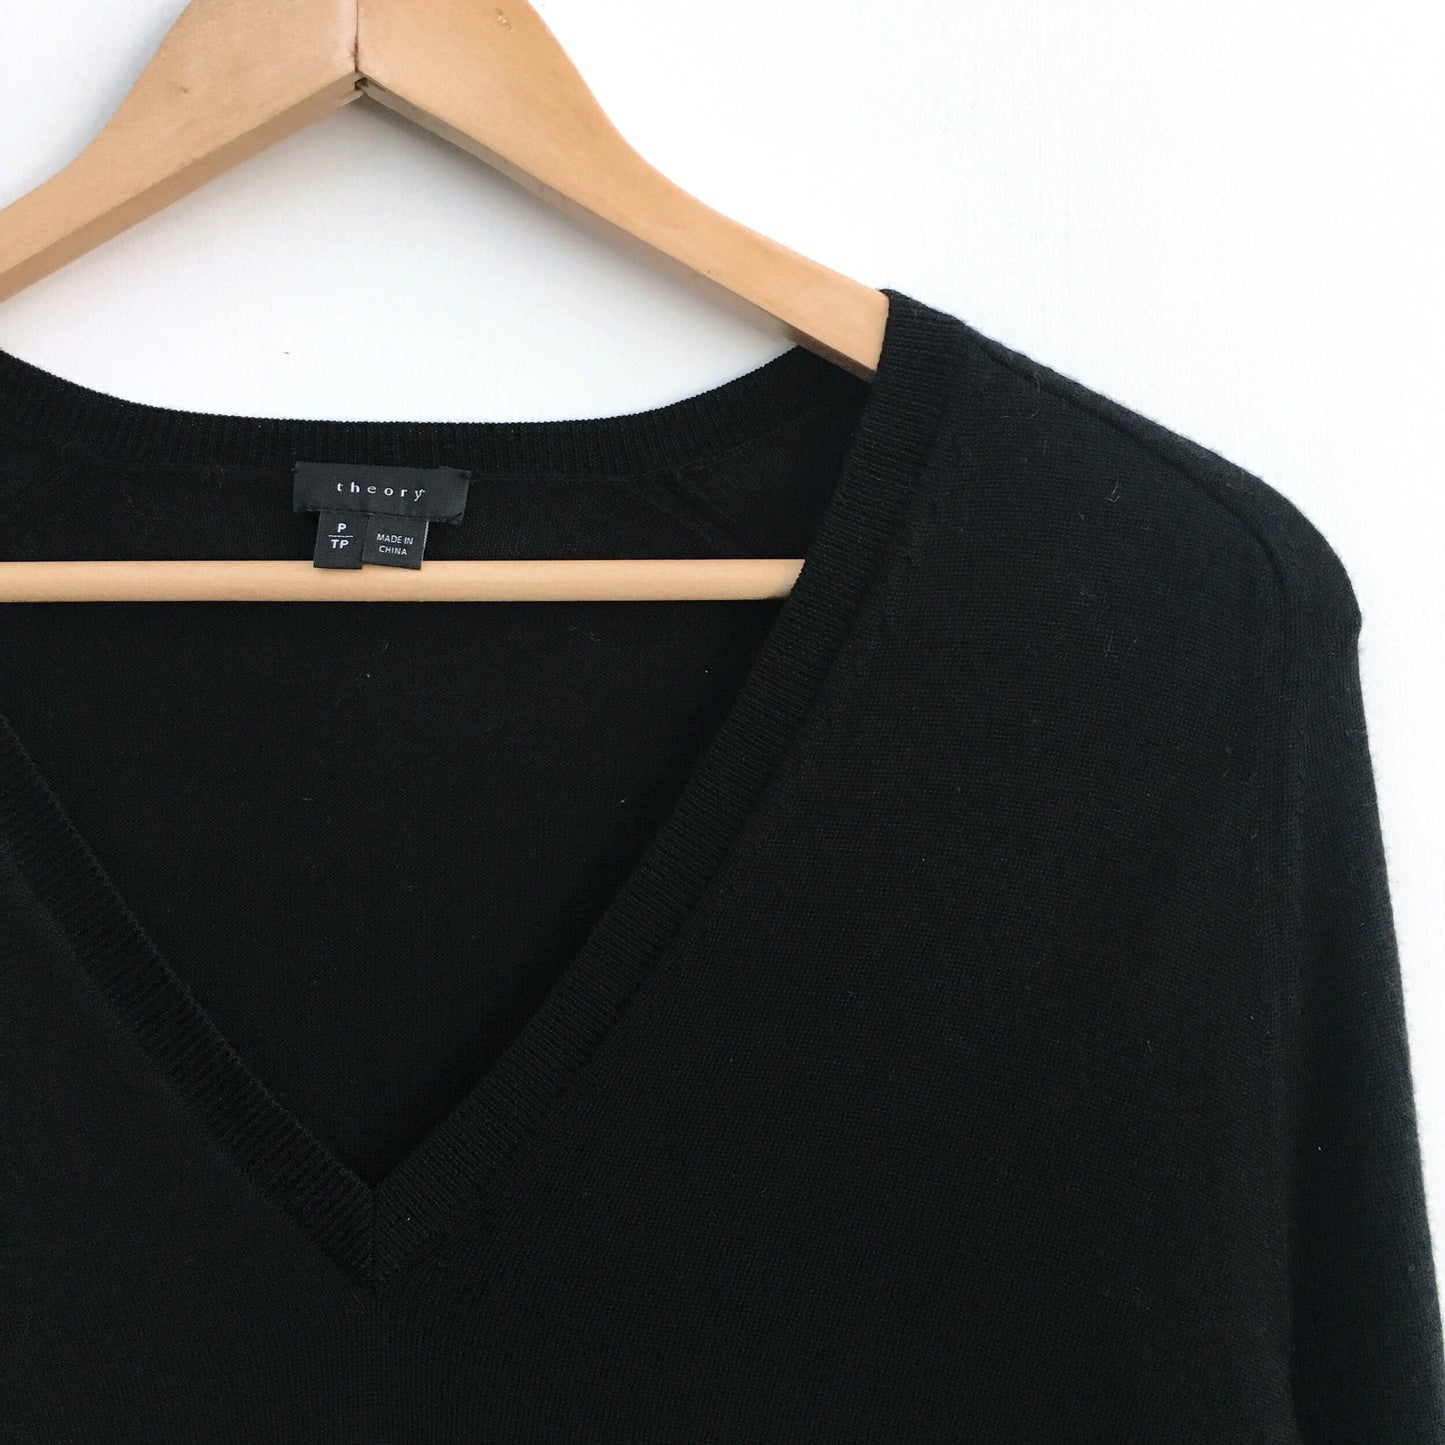 Theory V-neck Sweater - size Small